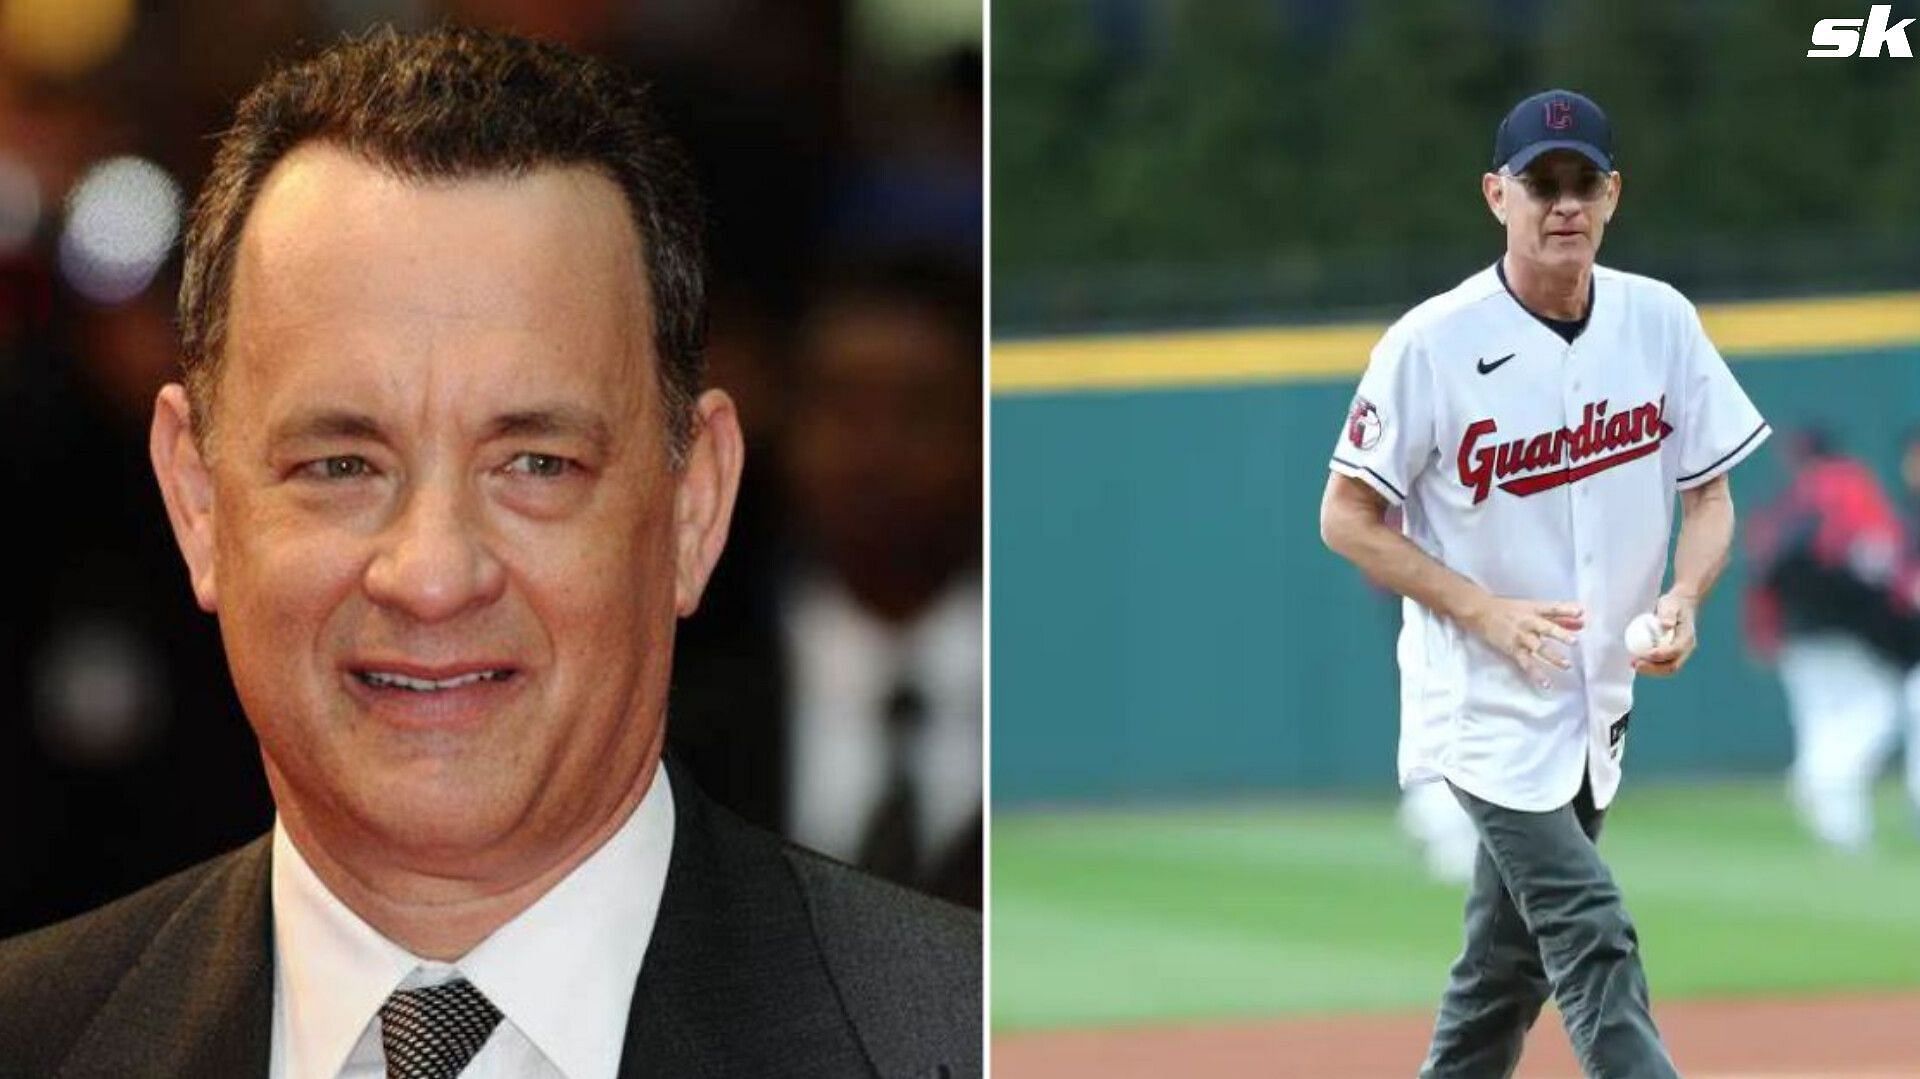 Actor Tom Hanks in Guardians shirt (Credits: Getty Images)